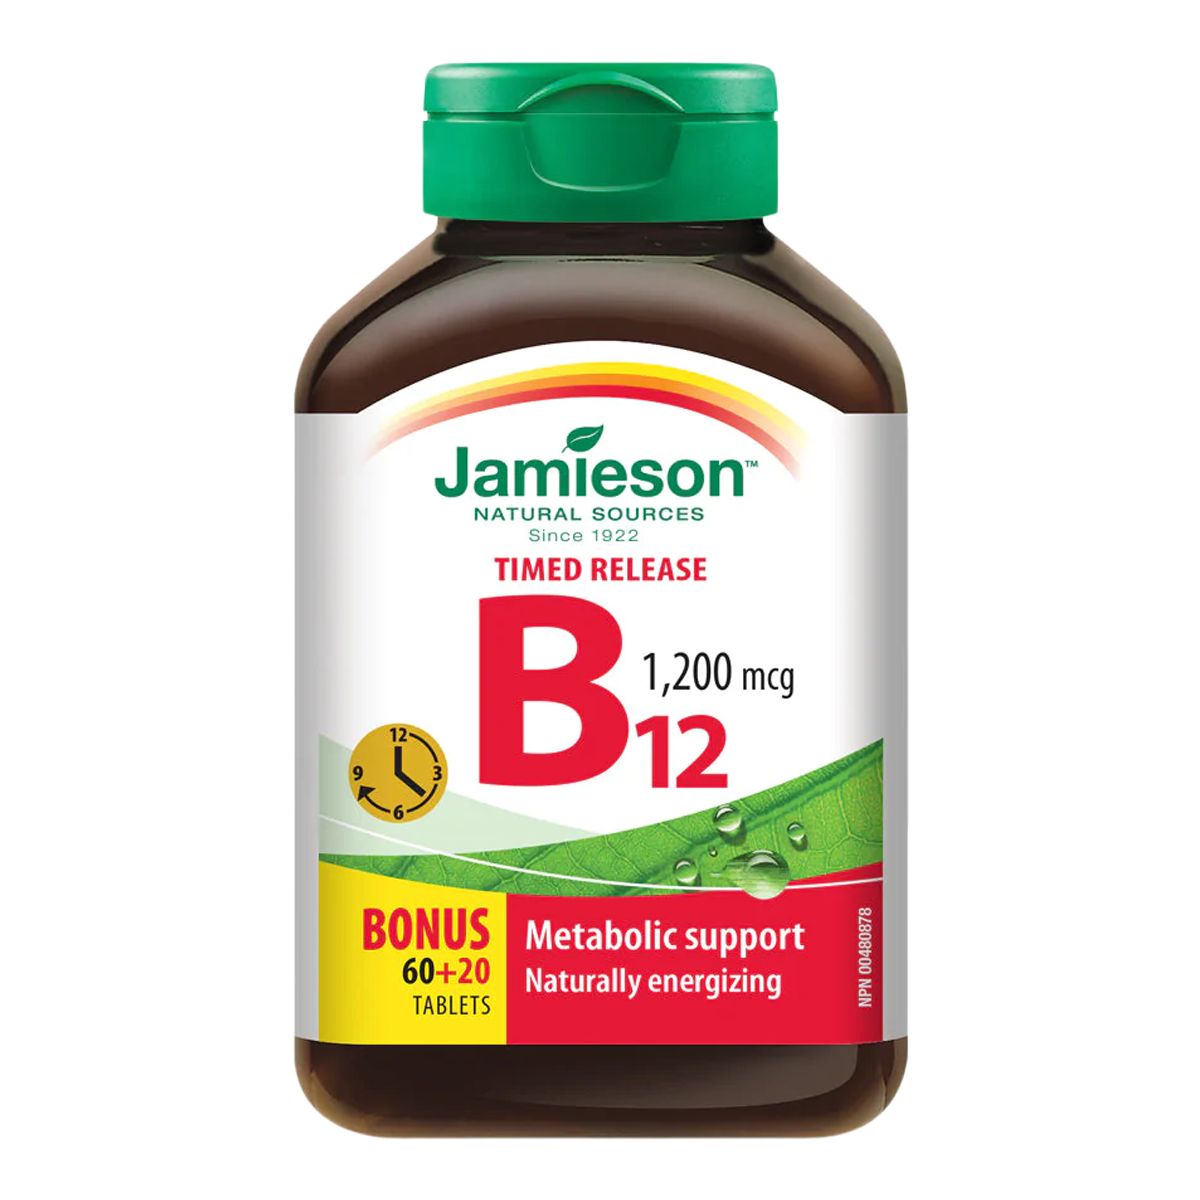 Image of Jamieson Timed Release Vitamin B12 80 Tablets 1200mcg 